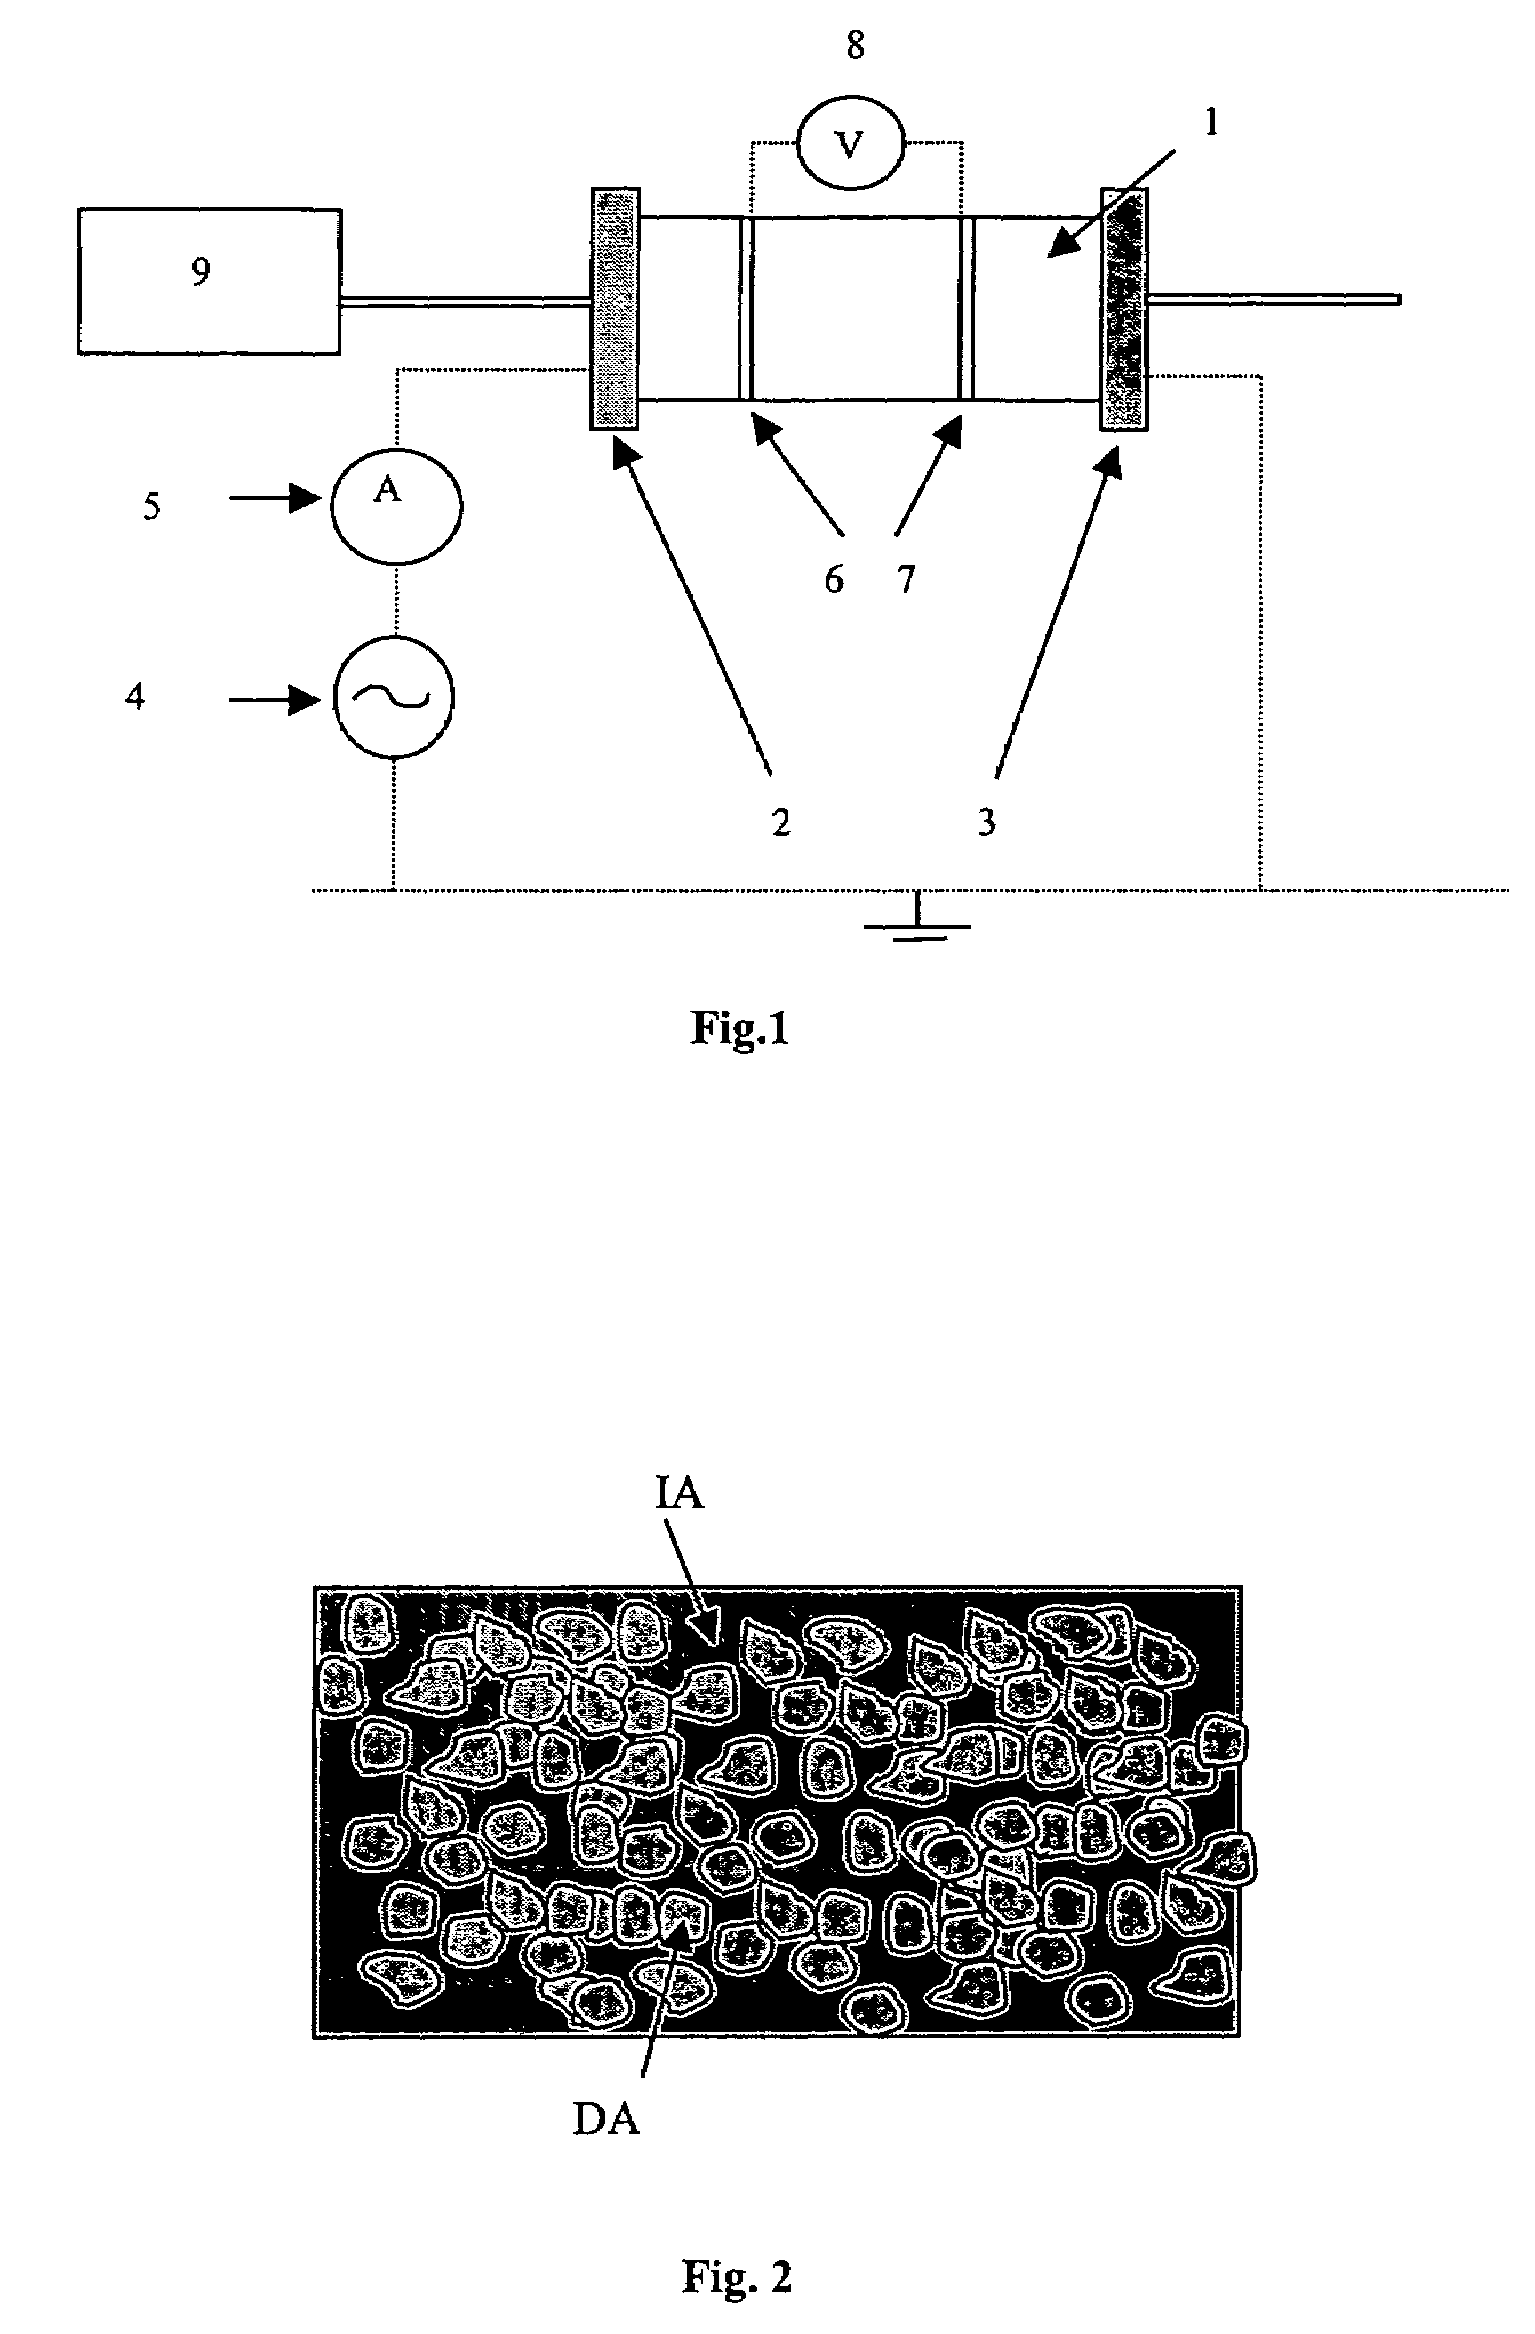 Method for determining of the formation factor for a subterranean deposit from measurements on drilling waste removed therefrom